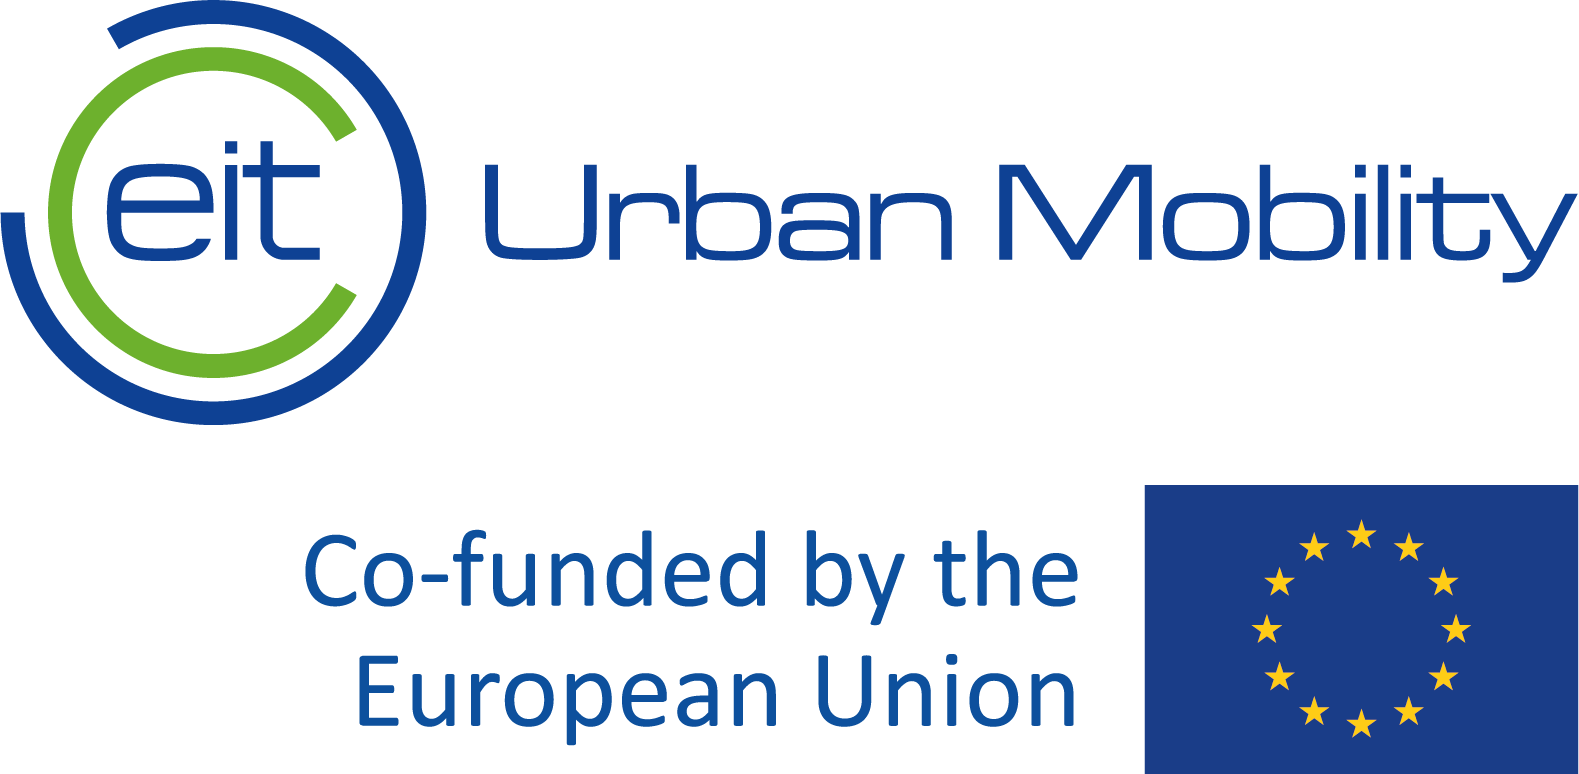 Logo of eIT Urban Mobility, blue and green color, European Union flag on the edge: blue background with twelve yellow stars on it.